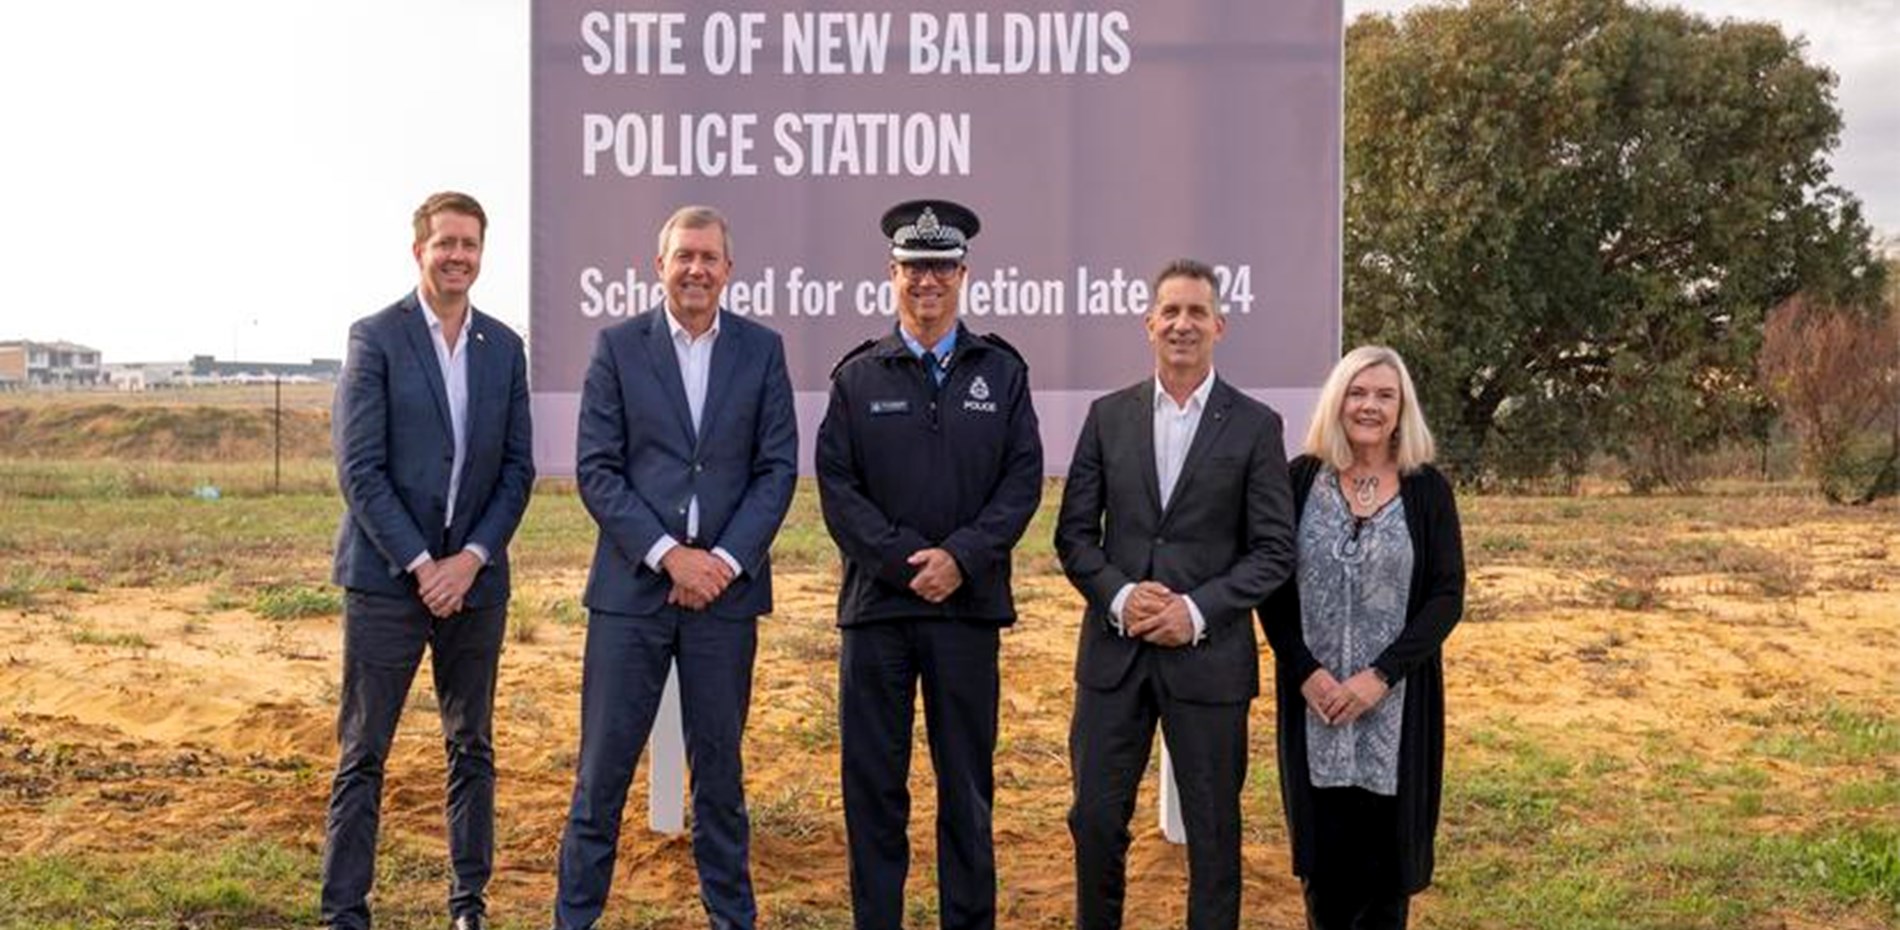 Baldivis Police Station is opening in 2025 Main Image